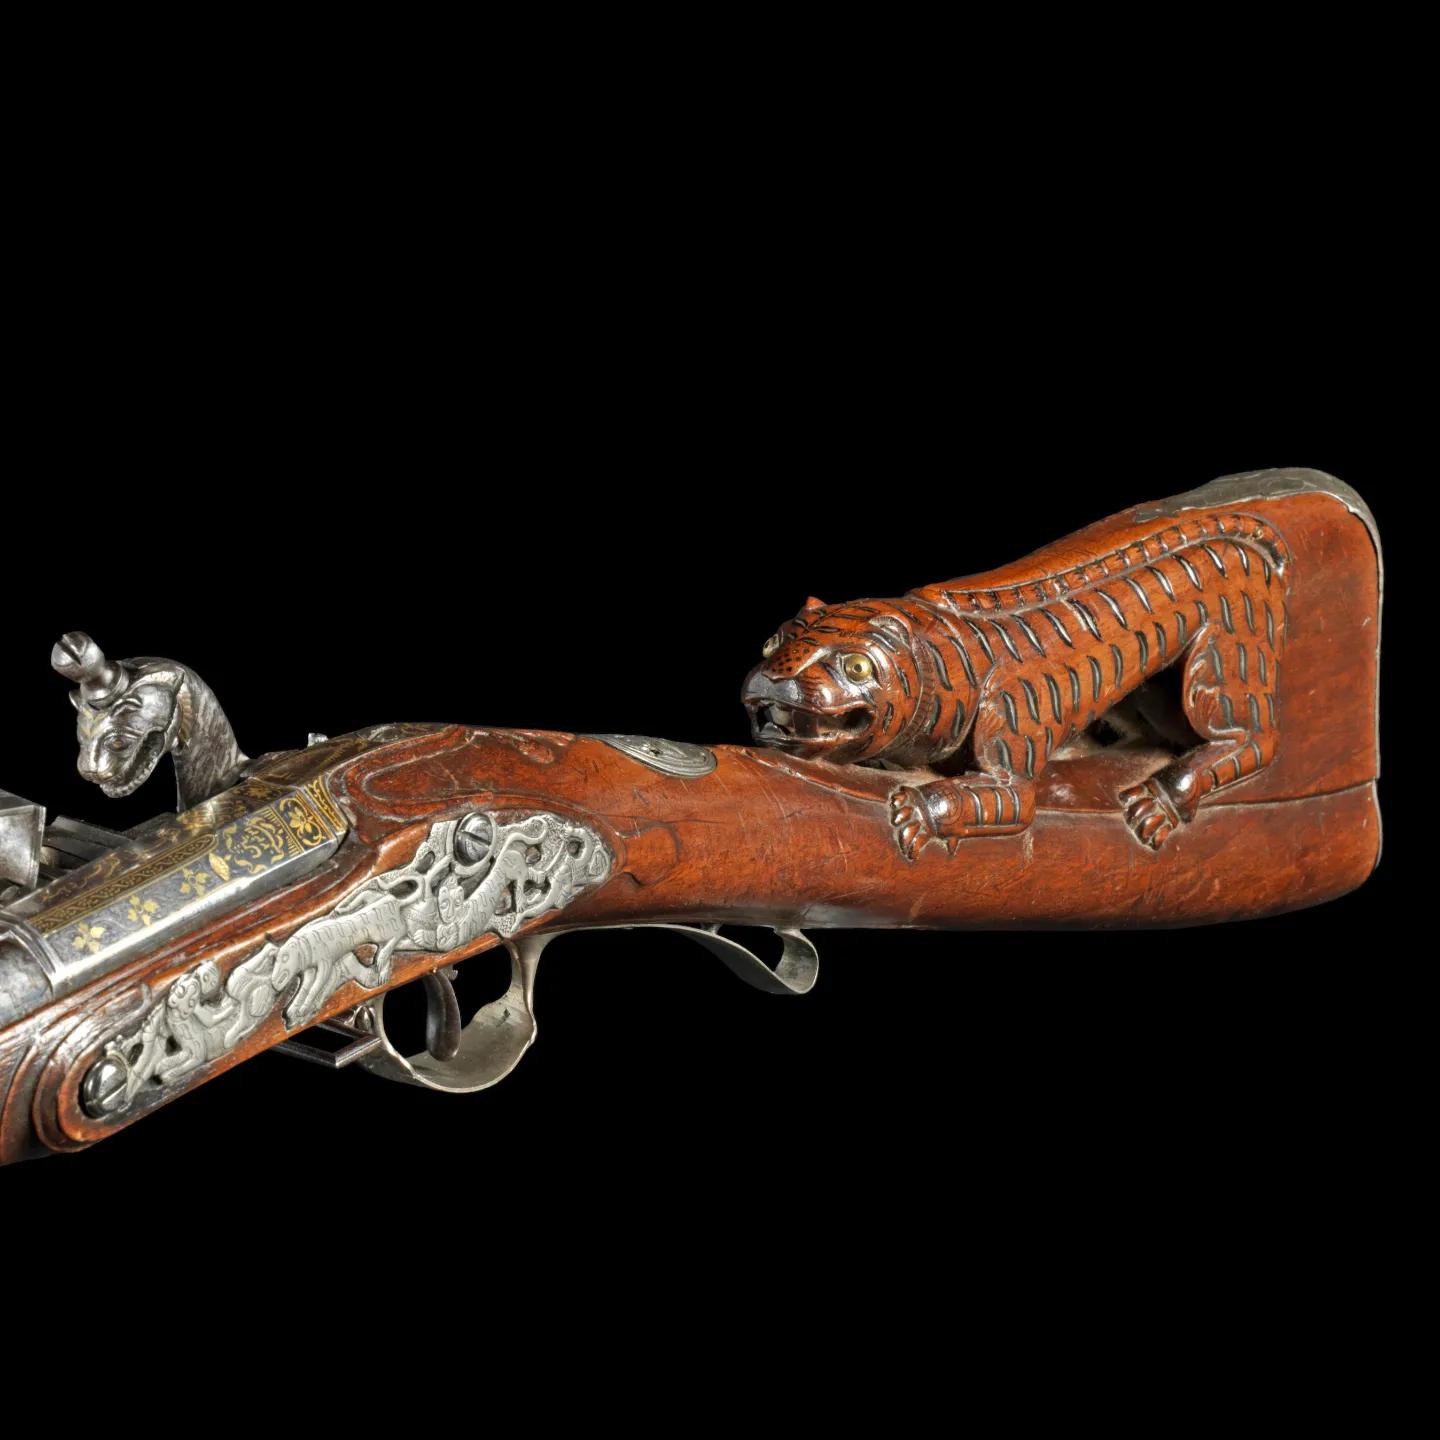 Superimposed Matchlock Gun of Tipu Sultan  - 1794 AD - Looted by the British after Seige of Srirangapatna.jpg